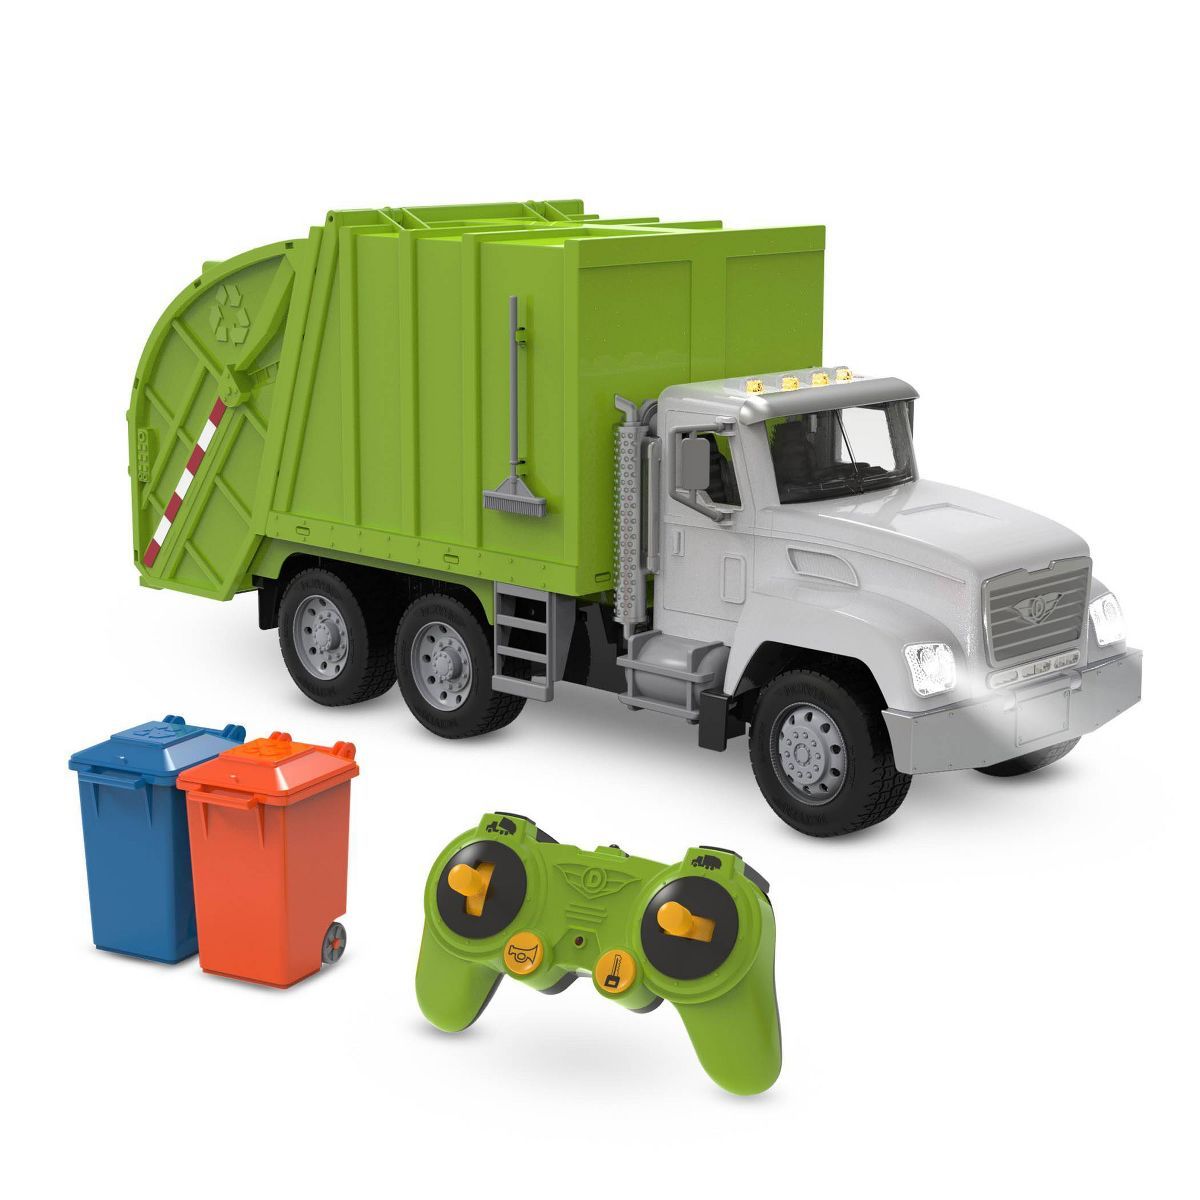 DRIVEN Standard Series Remote Control R/C Recycling Truck | Target